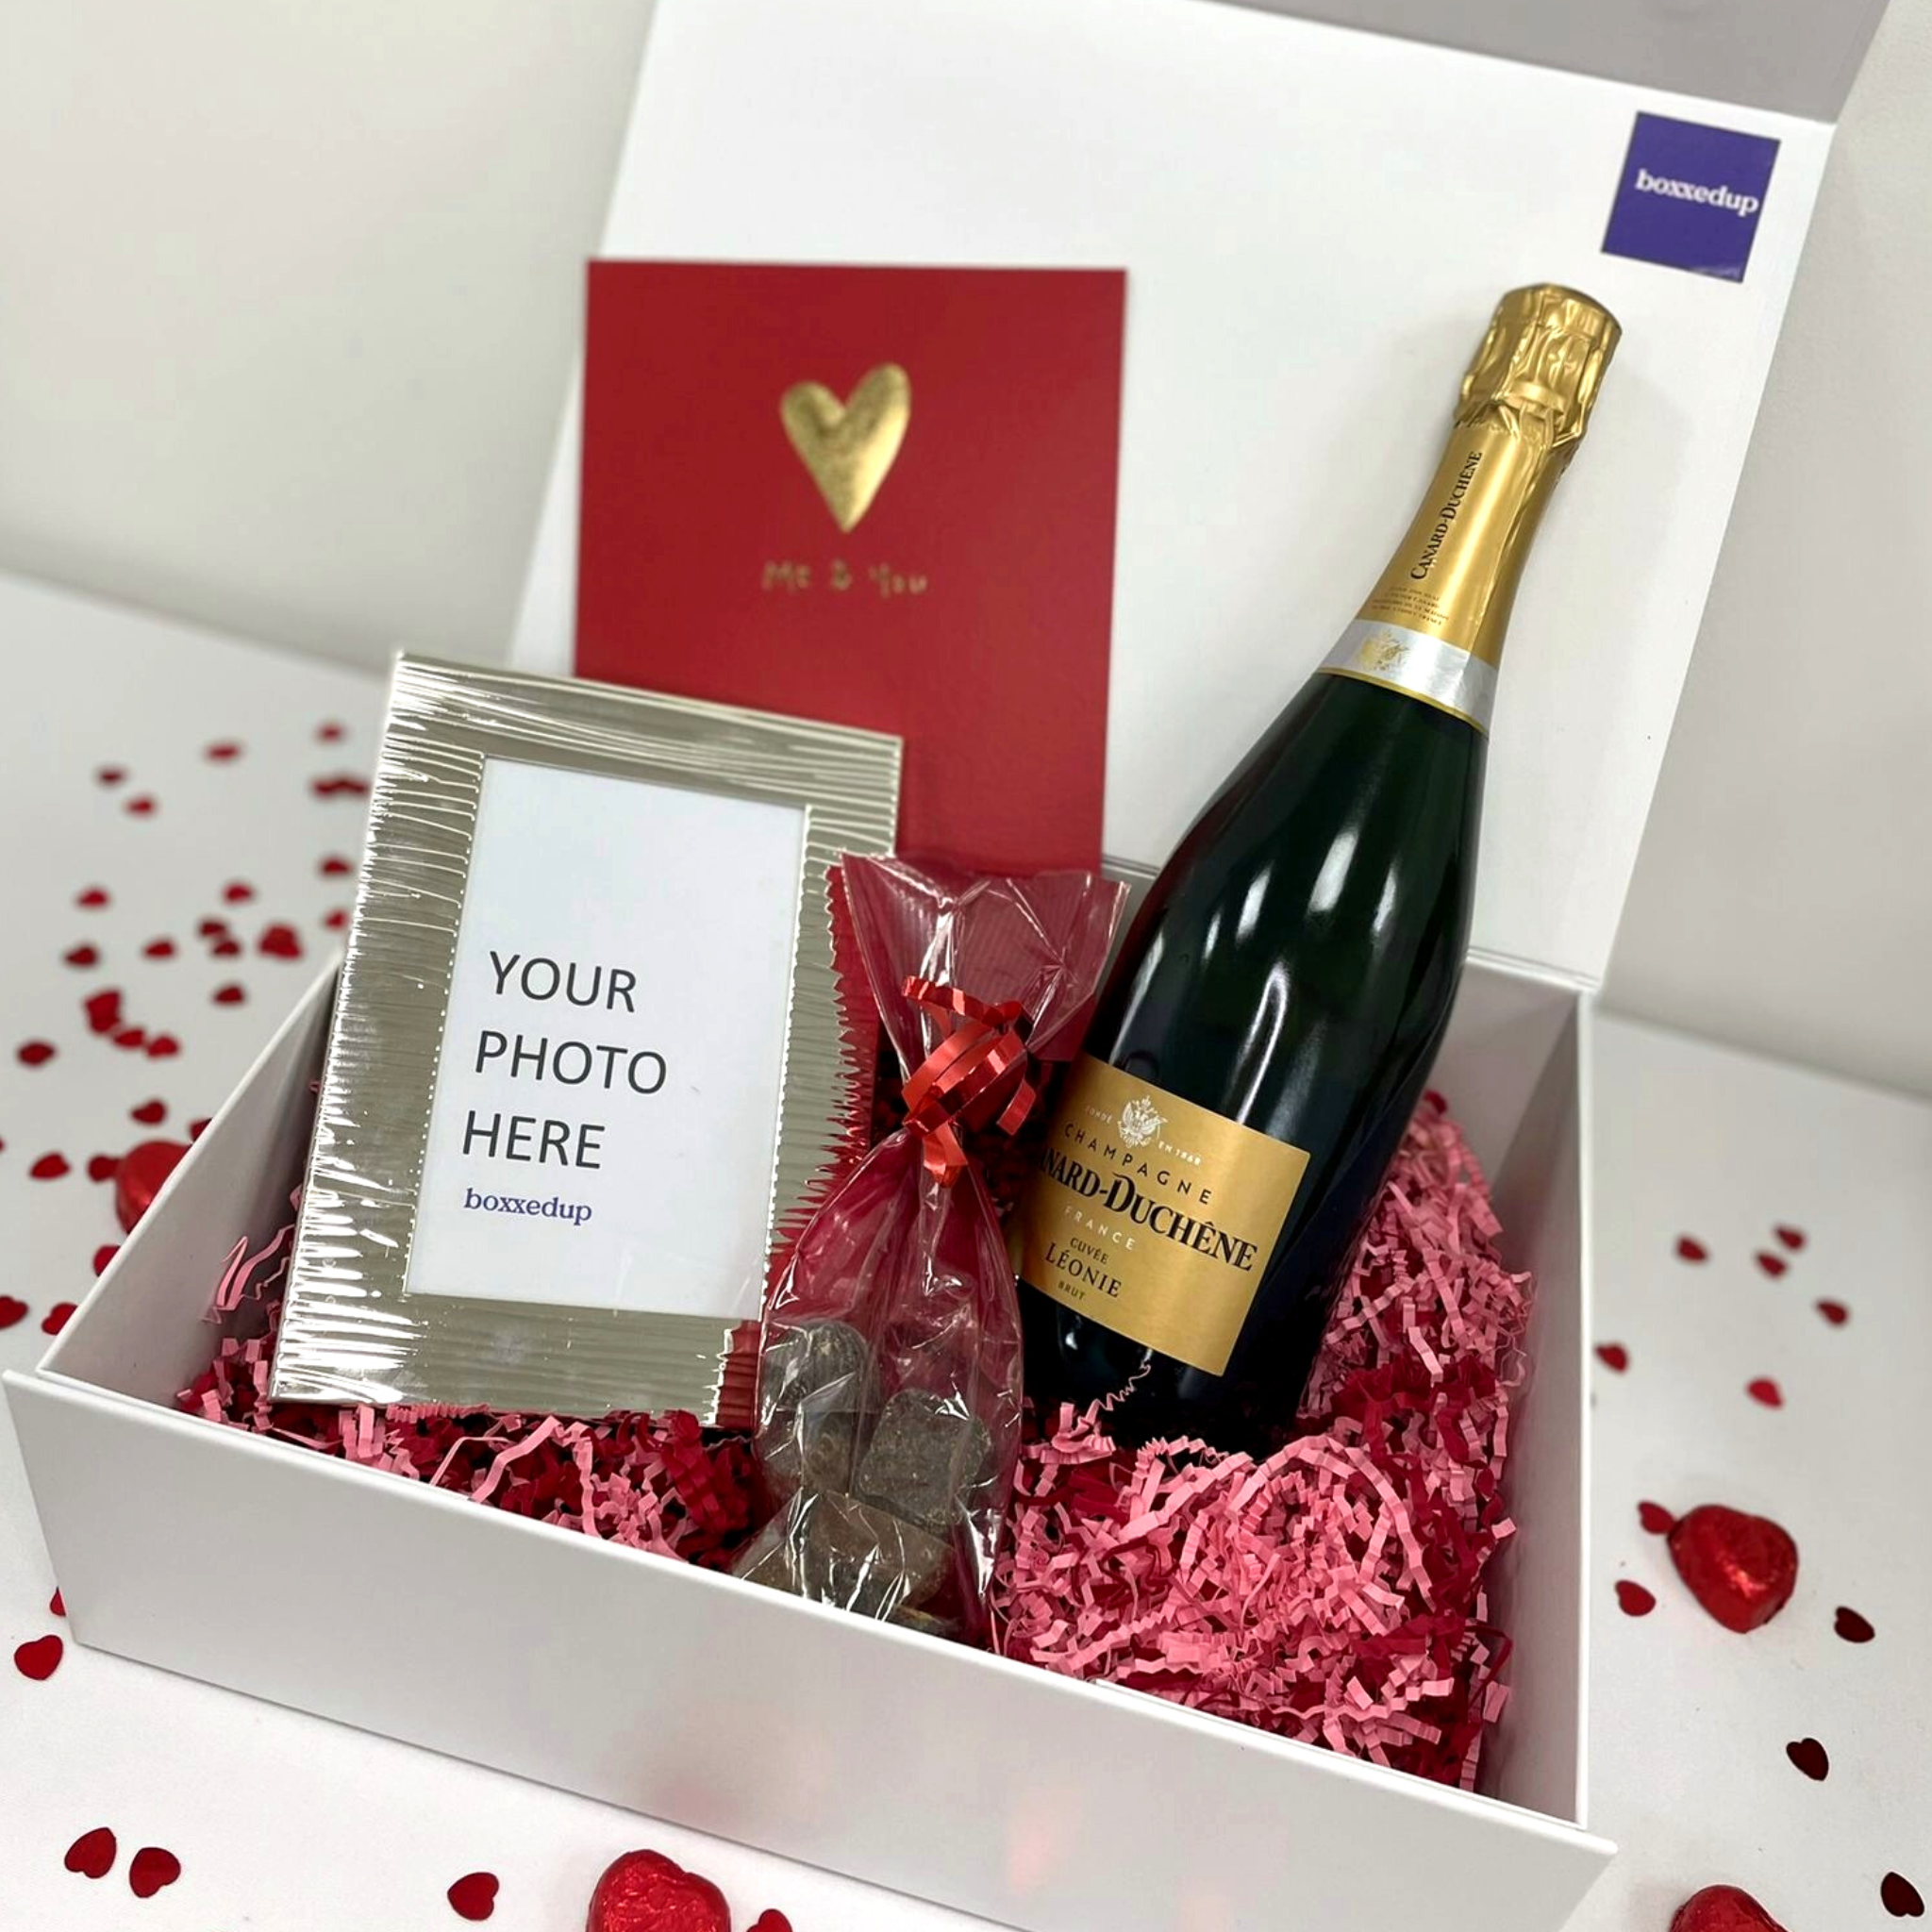 A box with valentine gifts, champagne, photo frame and card